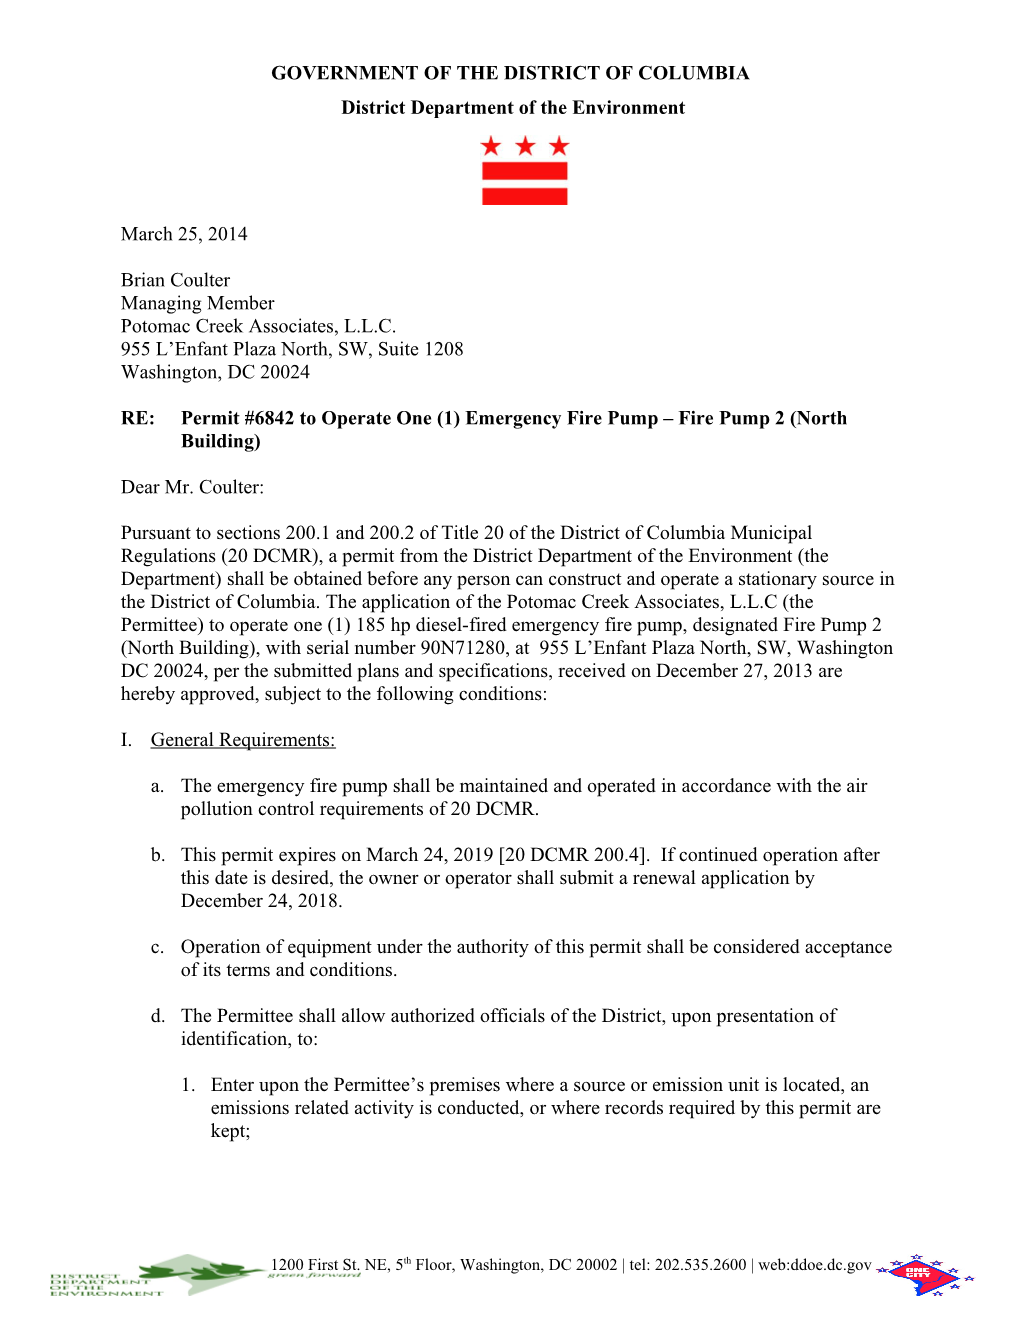 Permit #6842 to Operate an Emergency Fire Pump Fire Pump 2 (North Building)